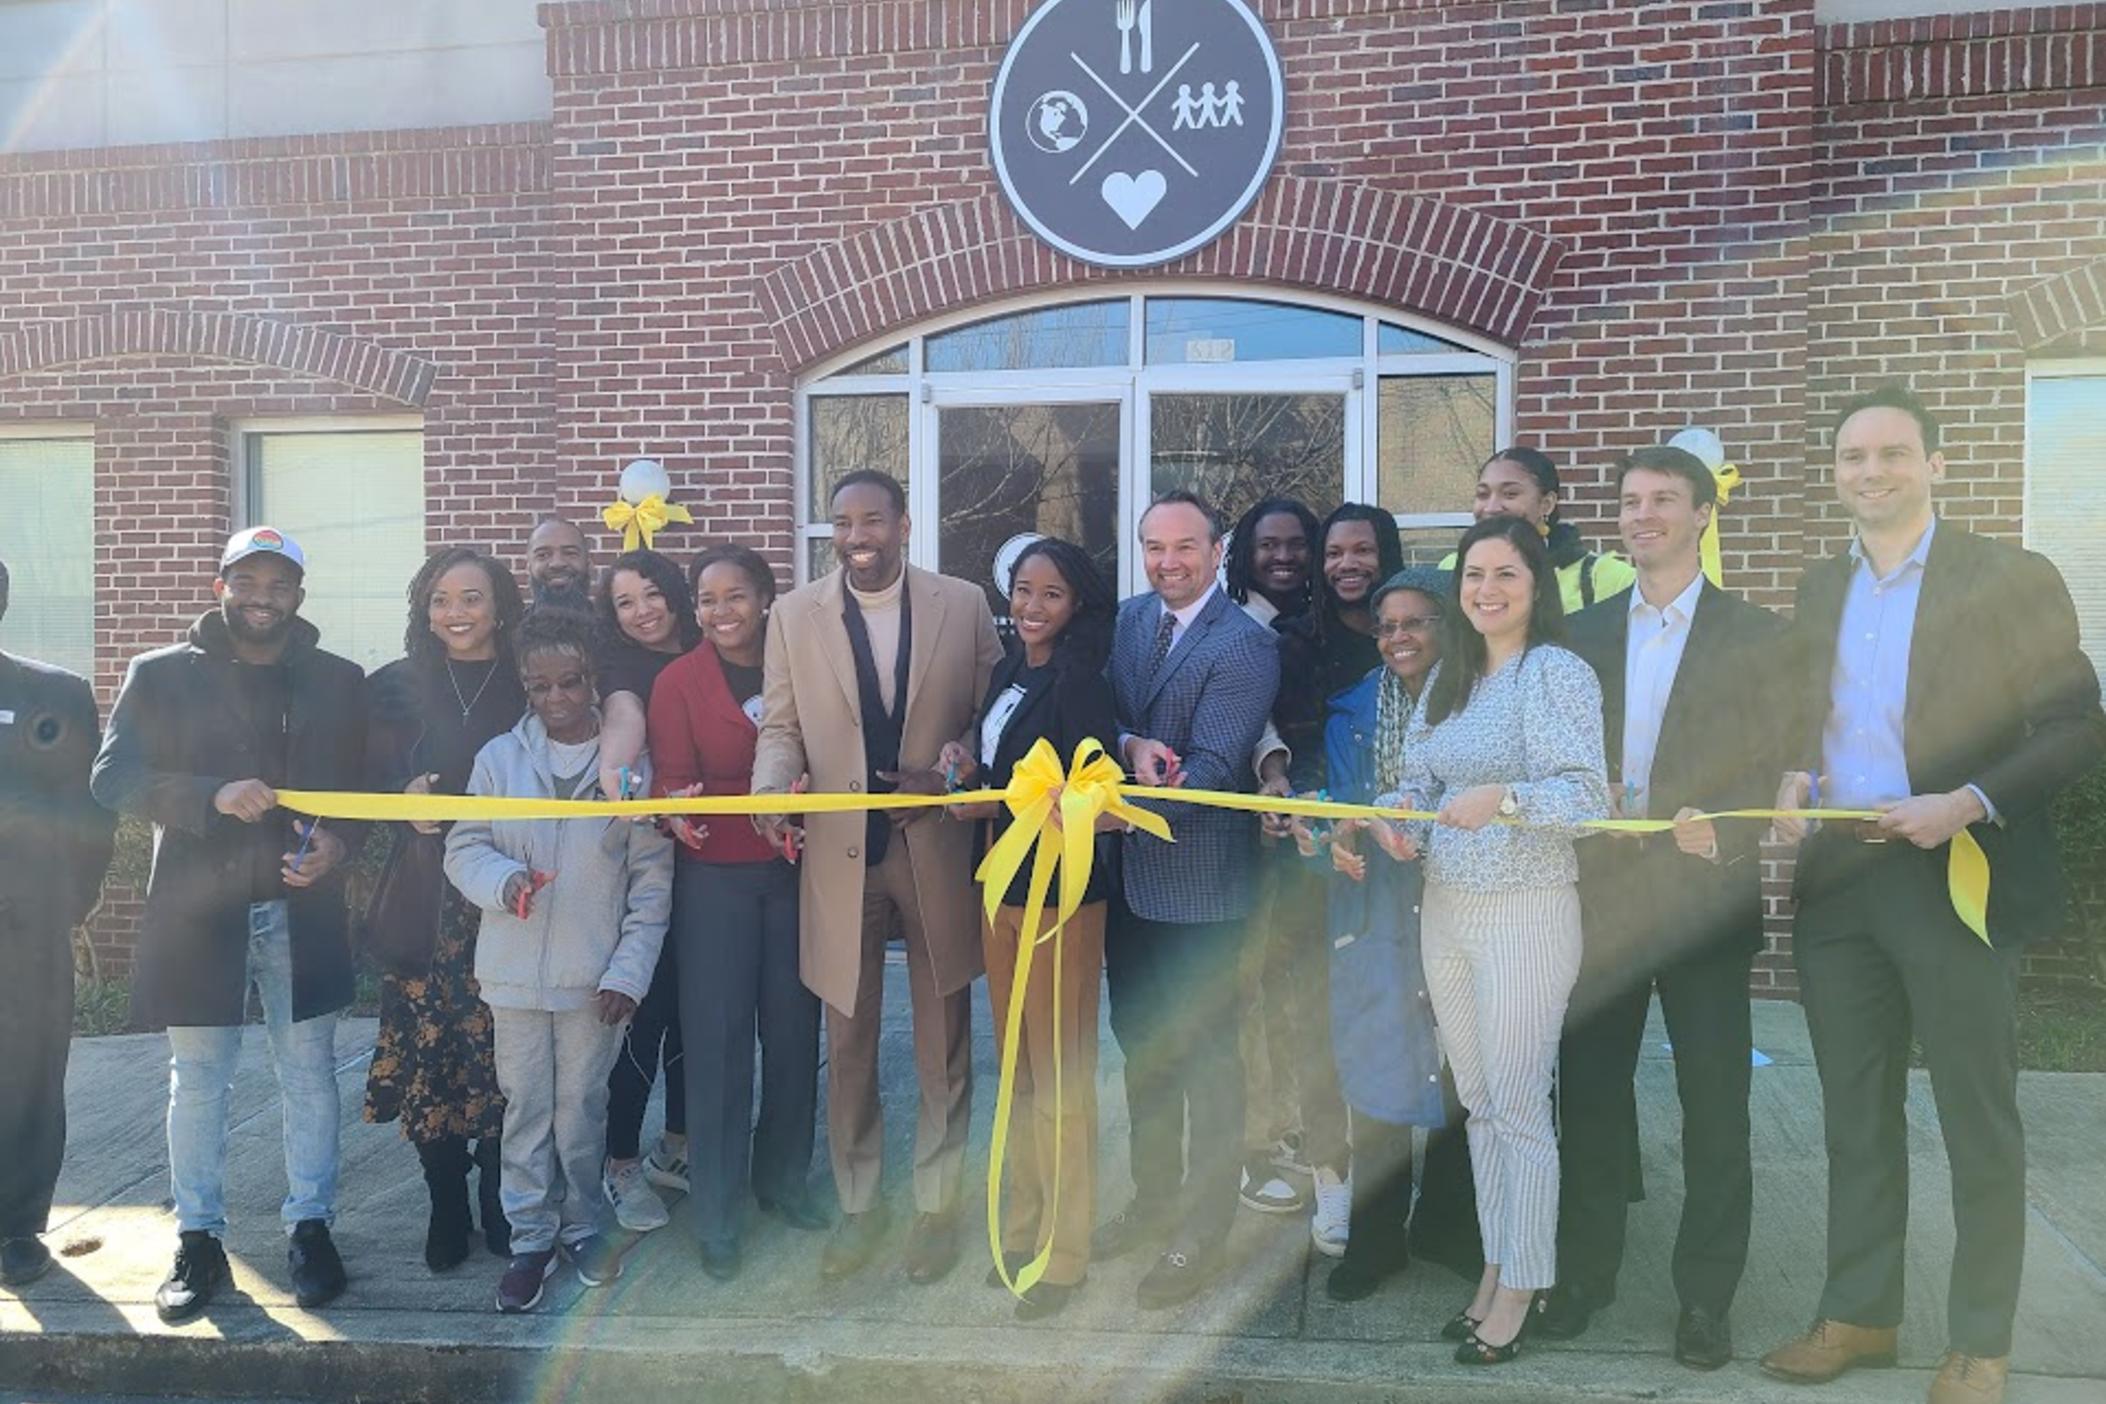 The Everyone Eats Foundation held a ribbon cutting ceremony March 20, 2023. The building is a partnership with Anthem Blue Cross Blue Shield to address food insecurity.